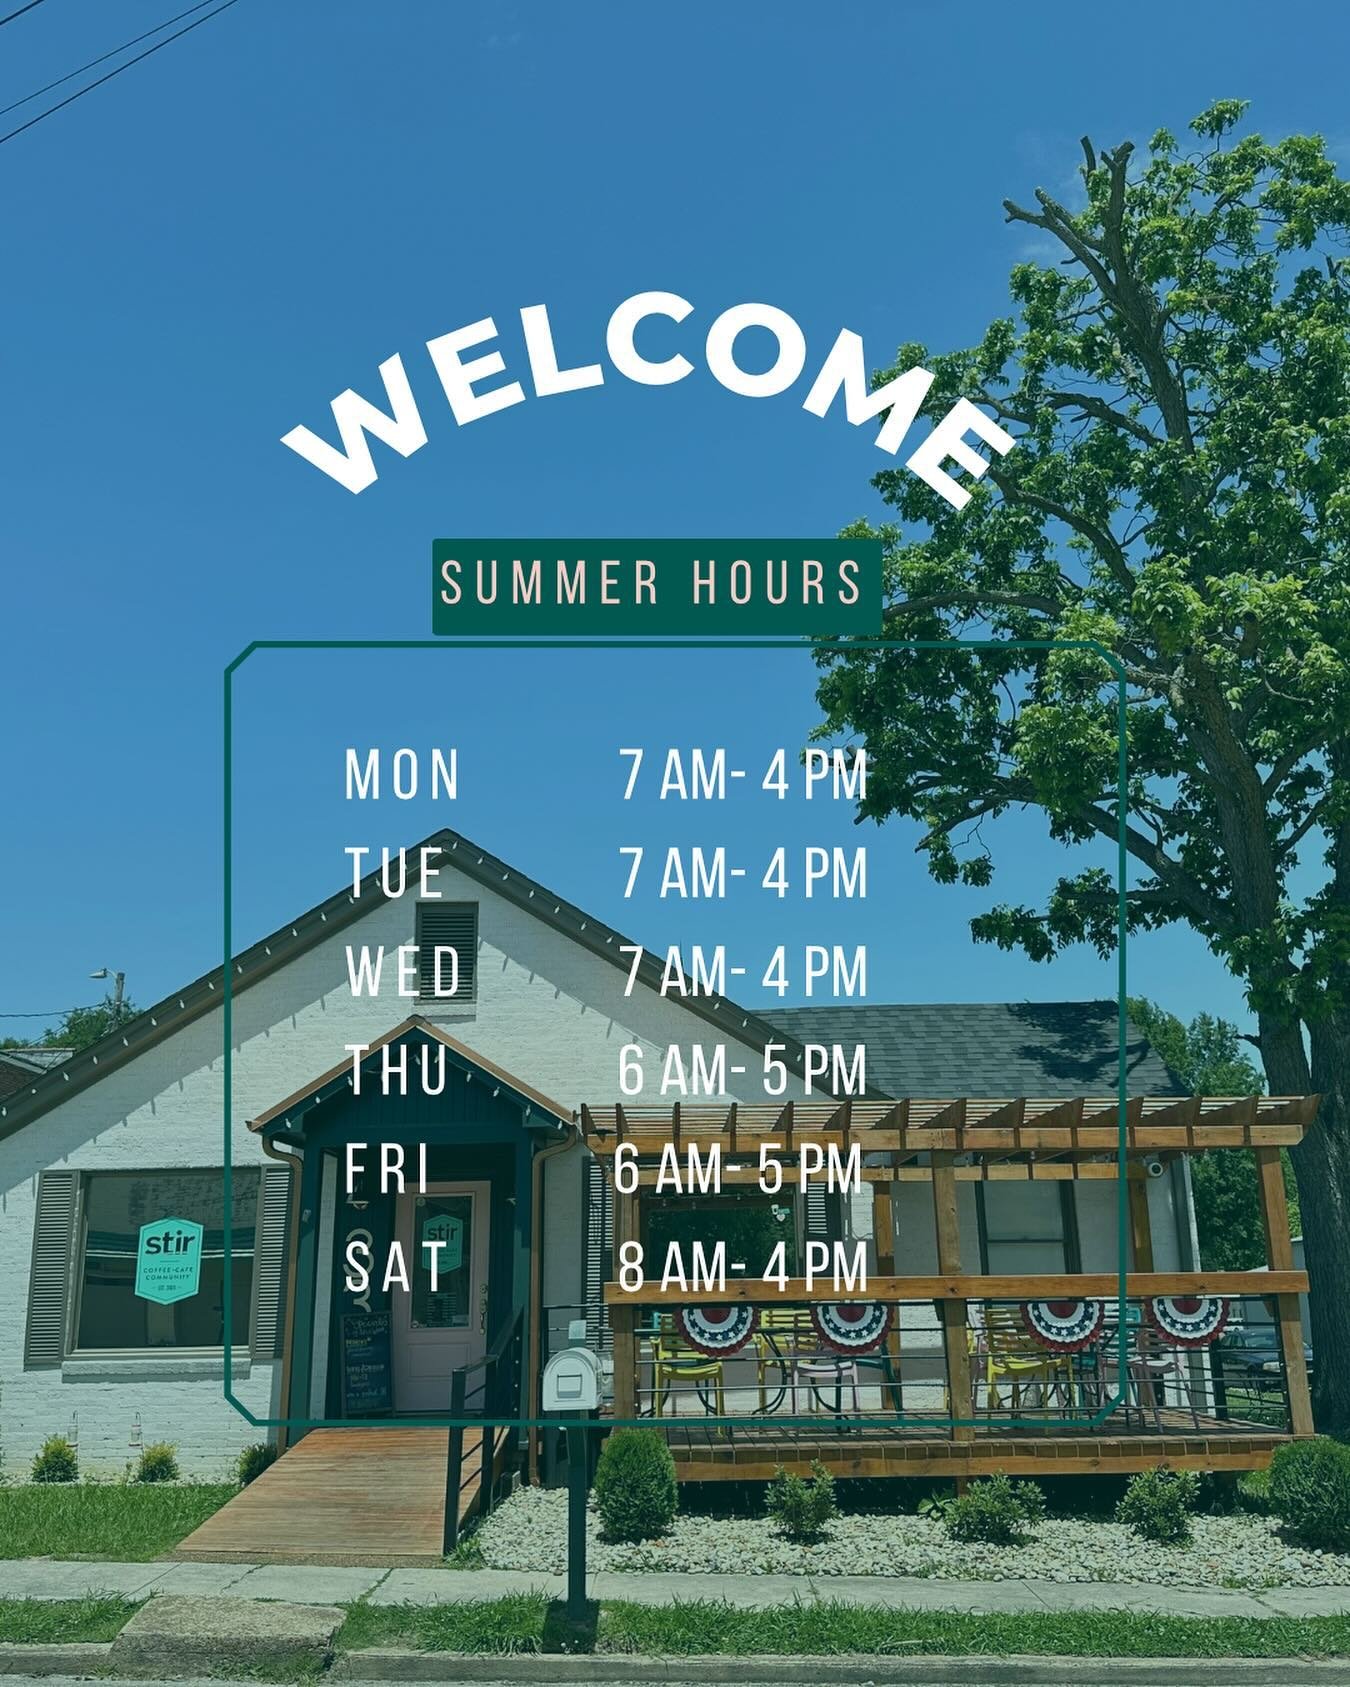 EXCITING NEWS: summer hours! We are going to adjust our hours a smidge to see how it works this summer. NOW OPEN 8 TIL 4 on Saturdays! #likeandshare #seeyousoon